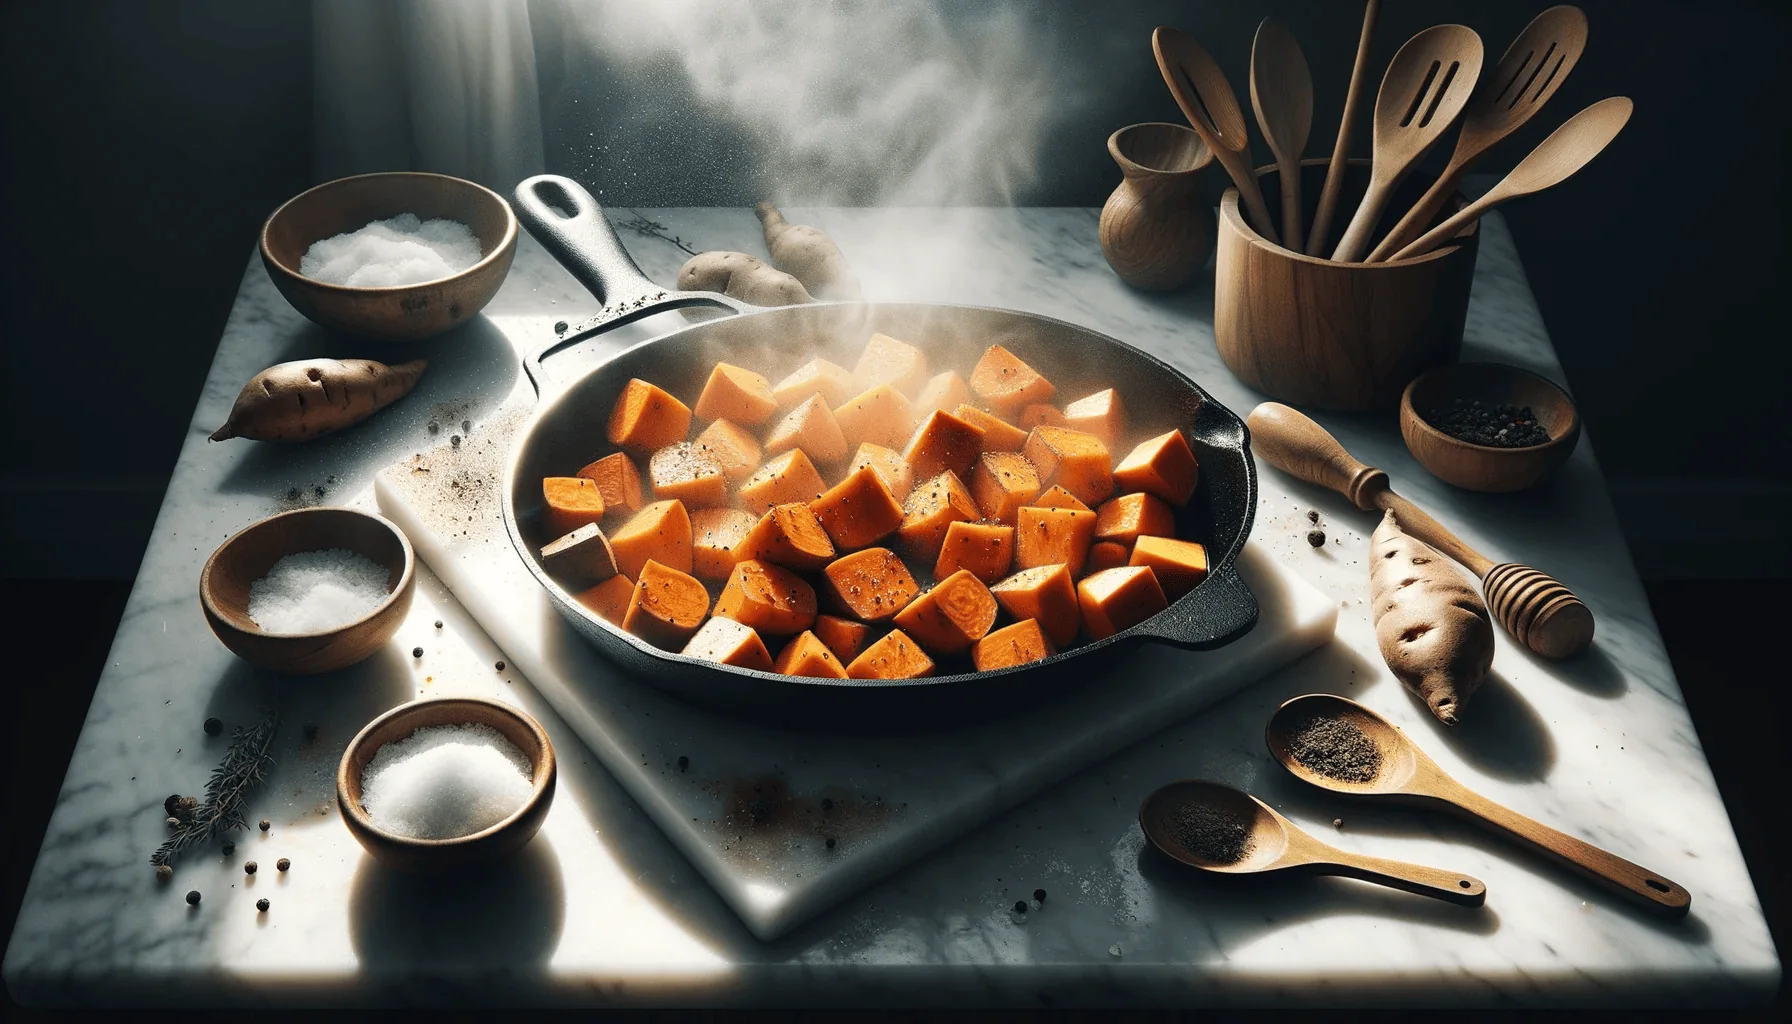 The making of roasted sweet potatoes